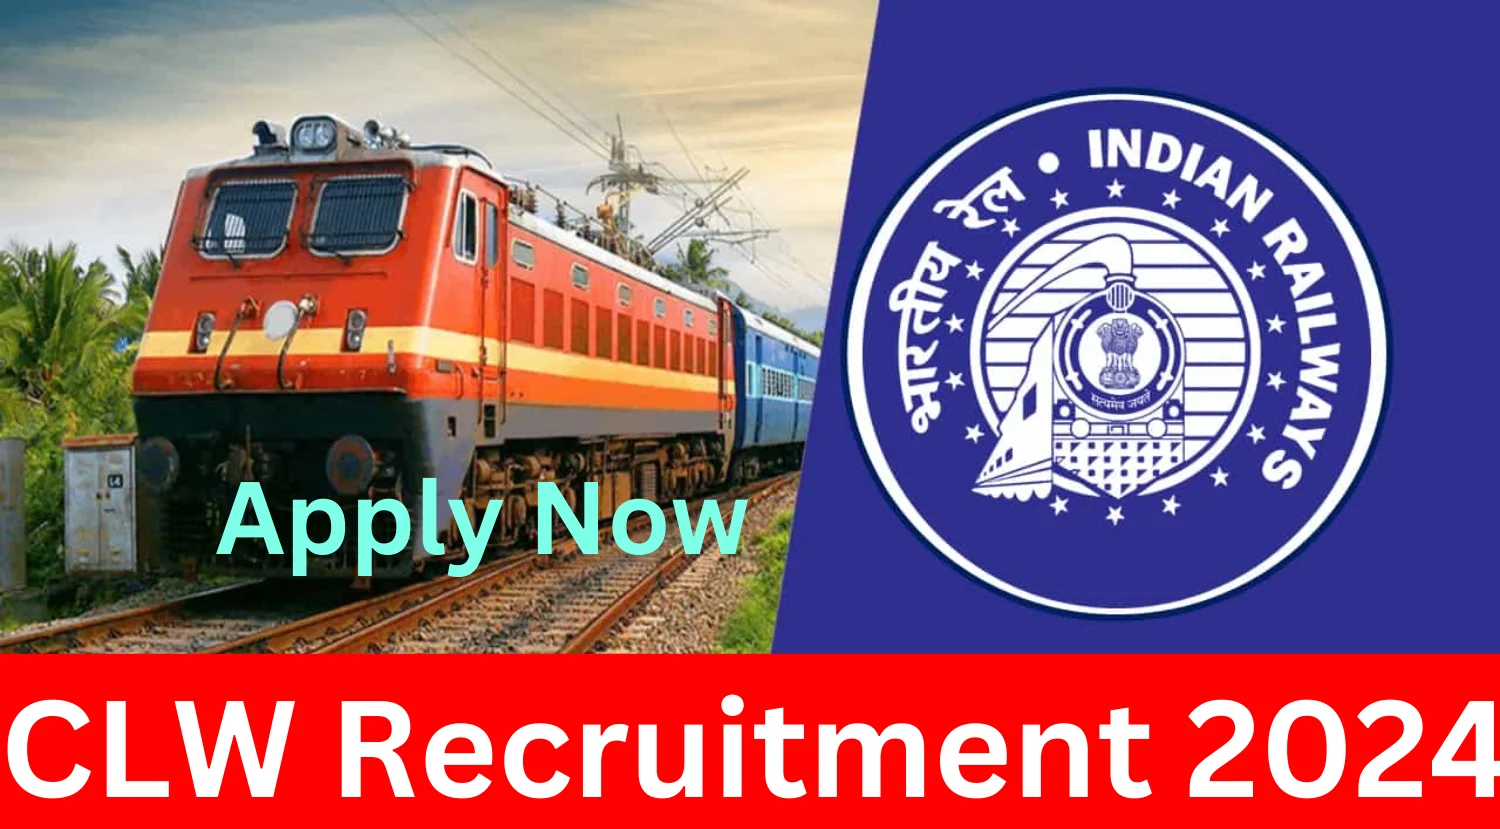 CLW Recruitment 2024 Notification